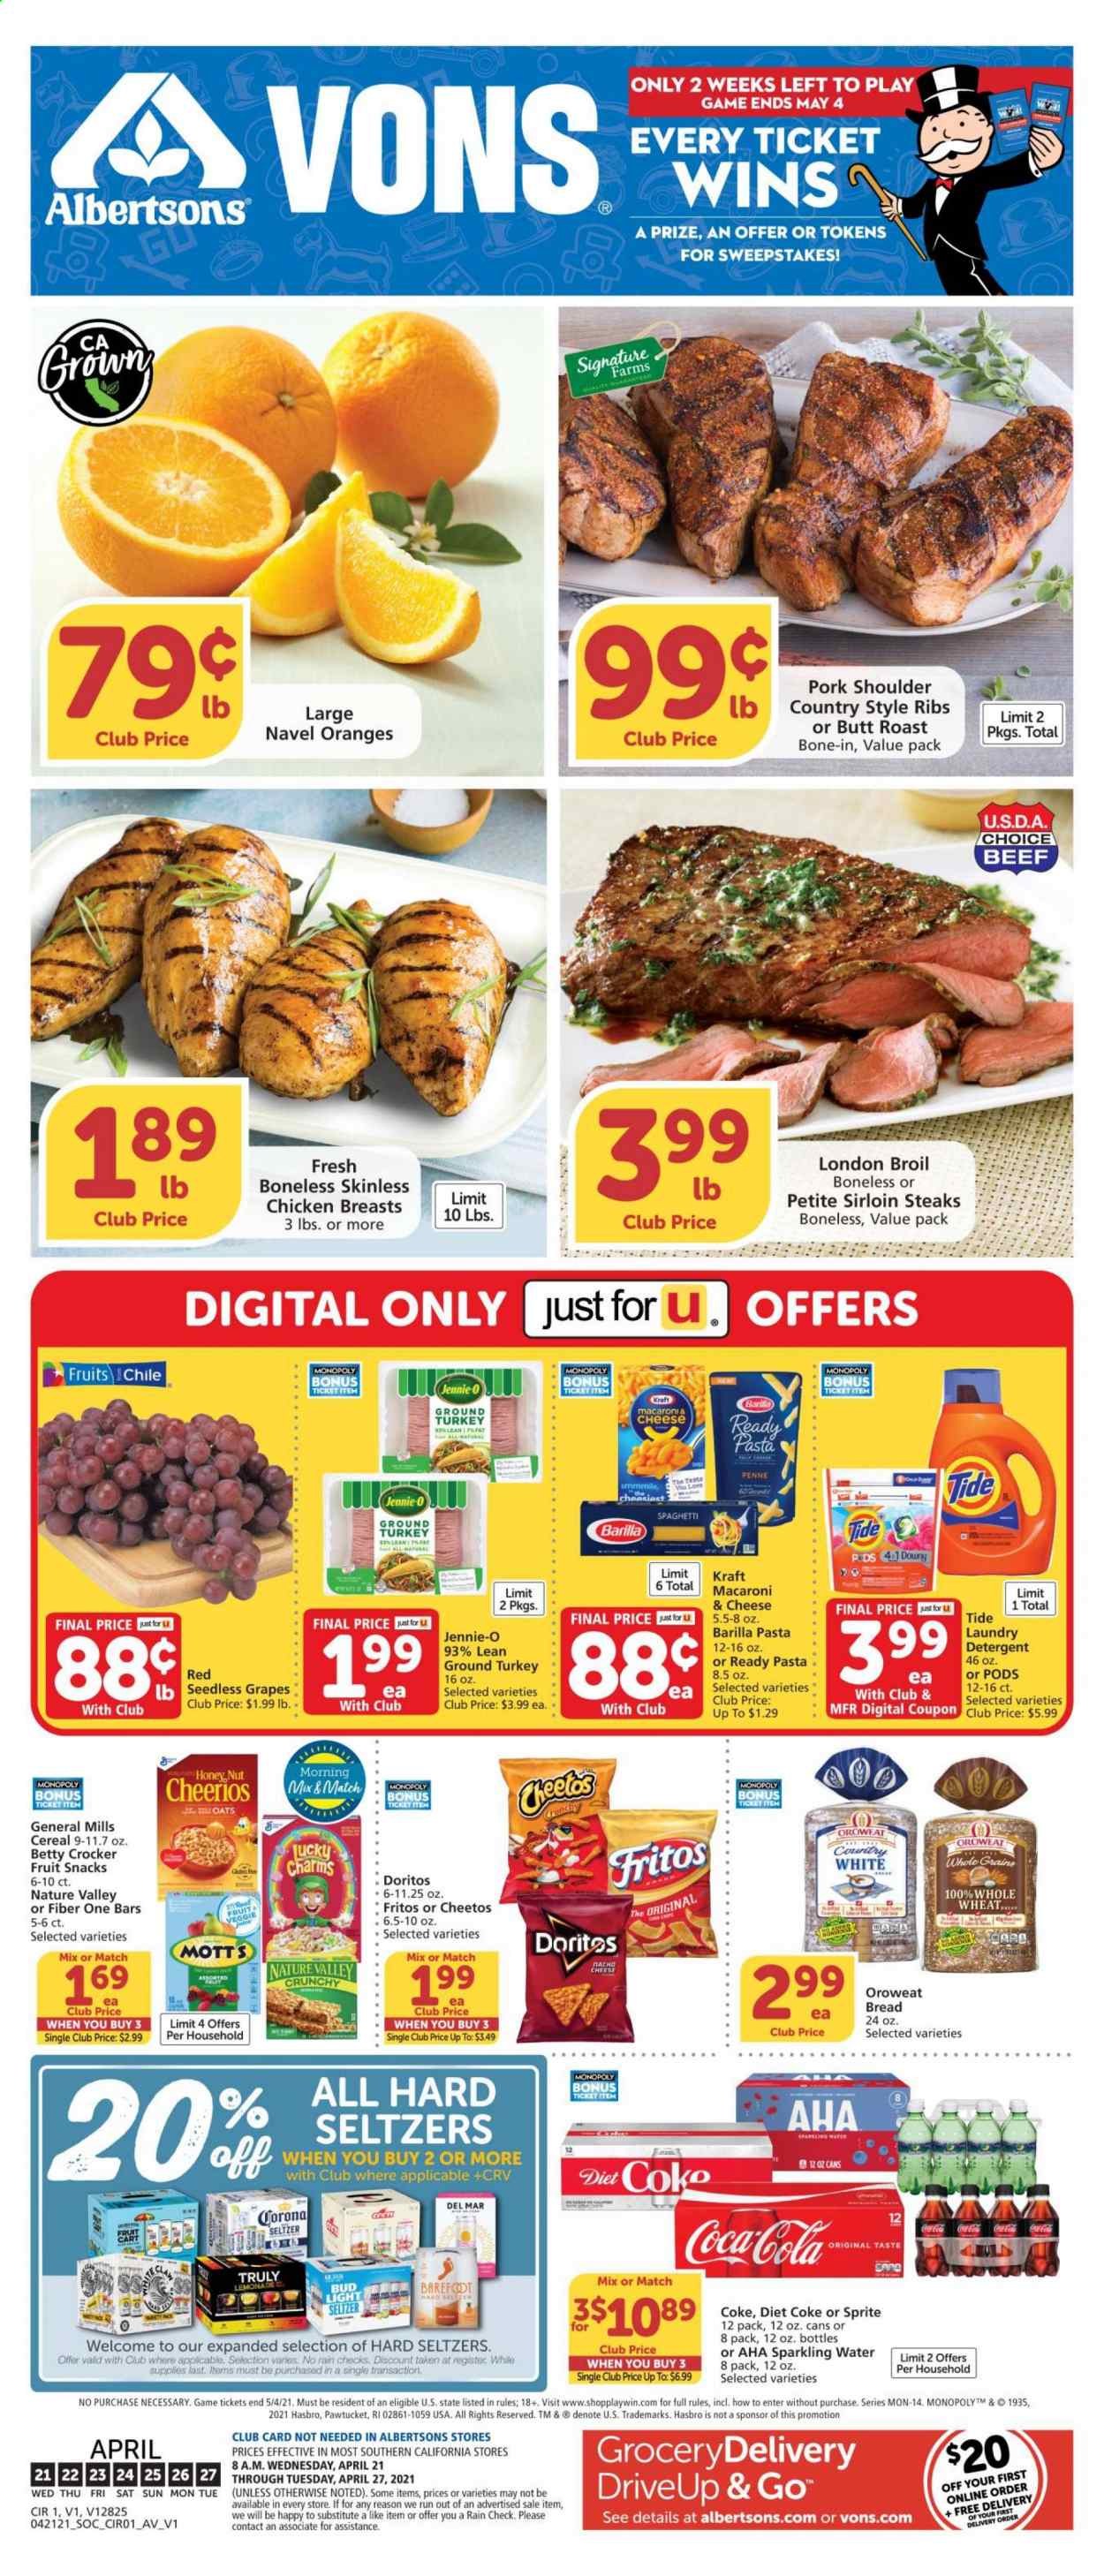 thumbnail - Vons Flyer - 04/21/2021 - 04/27/2021 - Sales products - seedless grapes, bread, grapes, oranges, Mott's, ground turkey, chicken breasts, steak, sirloin steak, pork meat, pork ribs, pork shoulder, country style ribs, macaroni & cheese, spaghetti, pasta, Barilla, Kraft®, fruit snack, Doritos, Fritos, Cheetos, oats, cereals, Cheerios, Ace, Nature Valley, Fiber One, penne, Coca-Cola, lemonade, Sprite, Diet Coke, sparkling water, Hard Seltzer, TRULY, beer, Bud Light, Corona Extra, detergent, Tide, laundry detergent, navel oranges. Page 1.